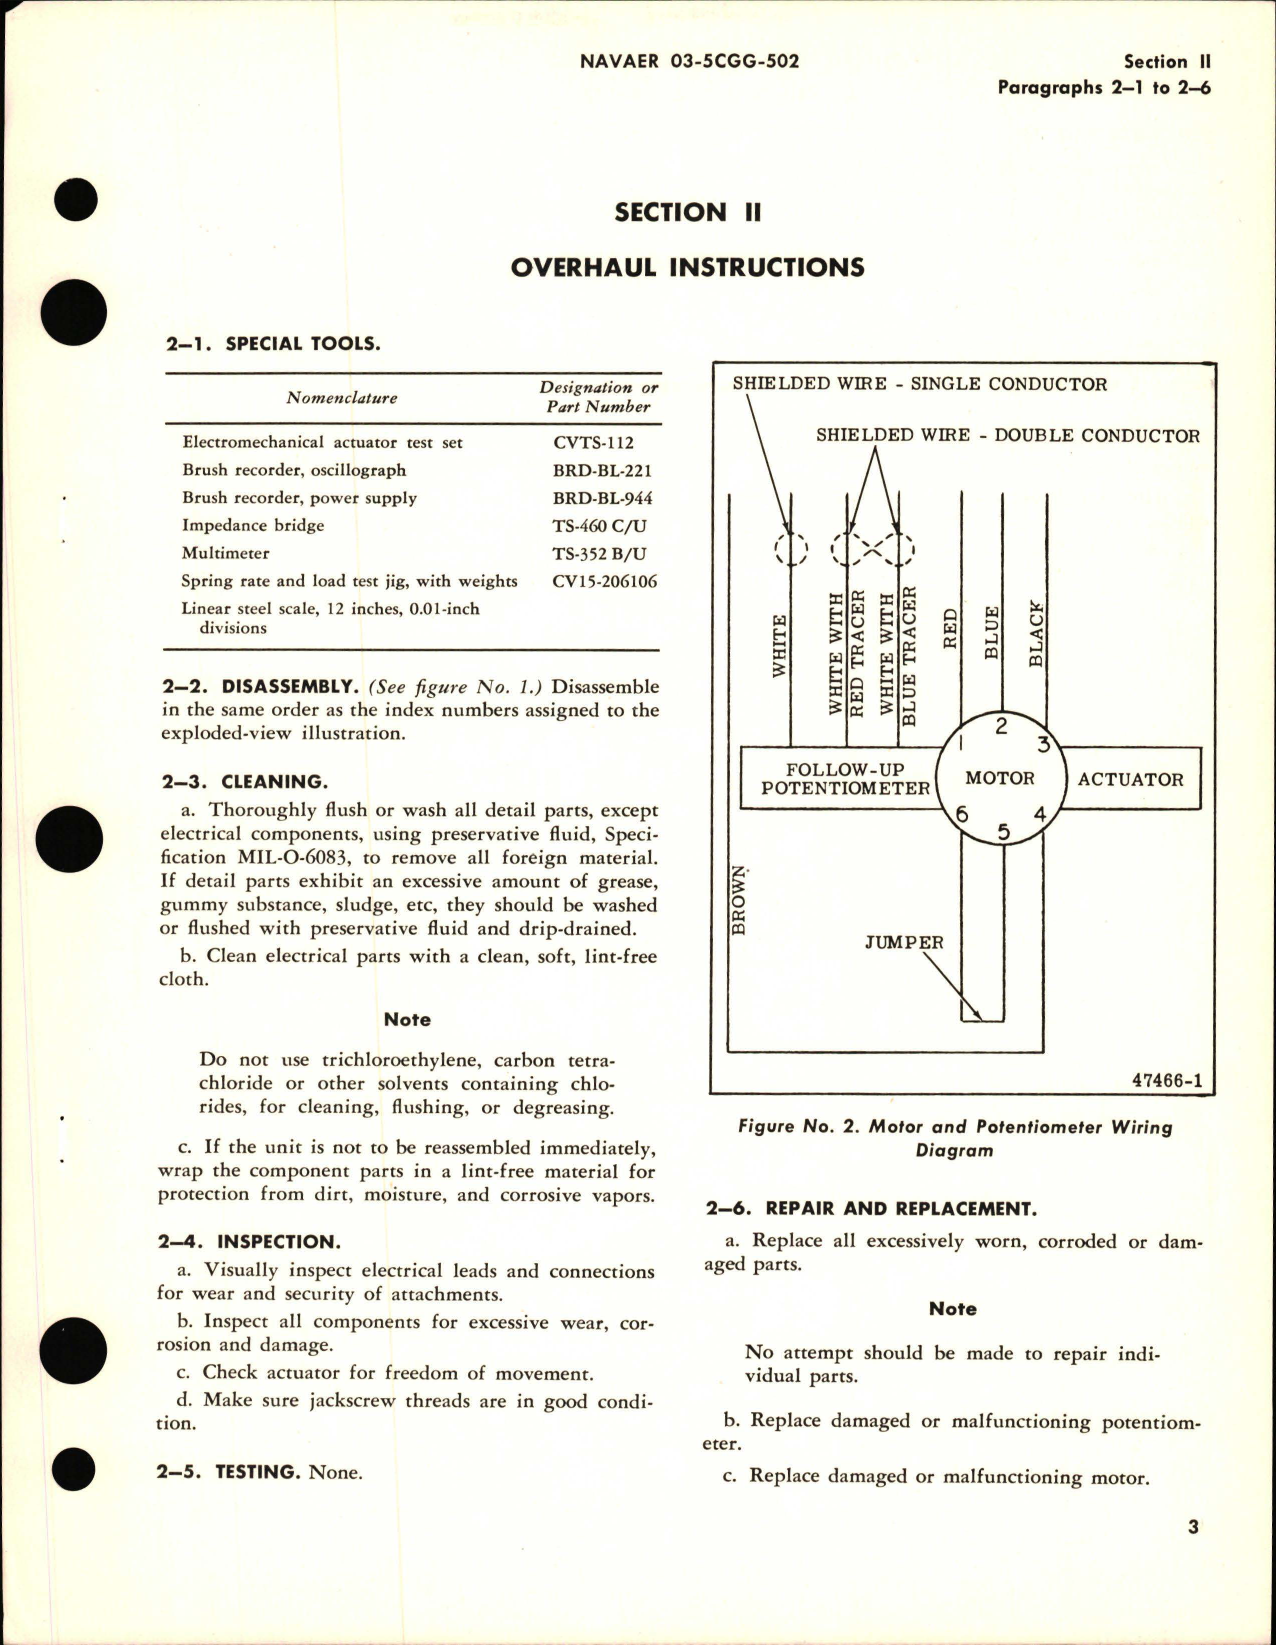 Sample page 5 from AirCorps Library document: Overhaul Instructions for Pitch Trim Actuator Assembly - Part CV15-158111-2 